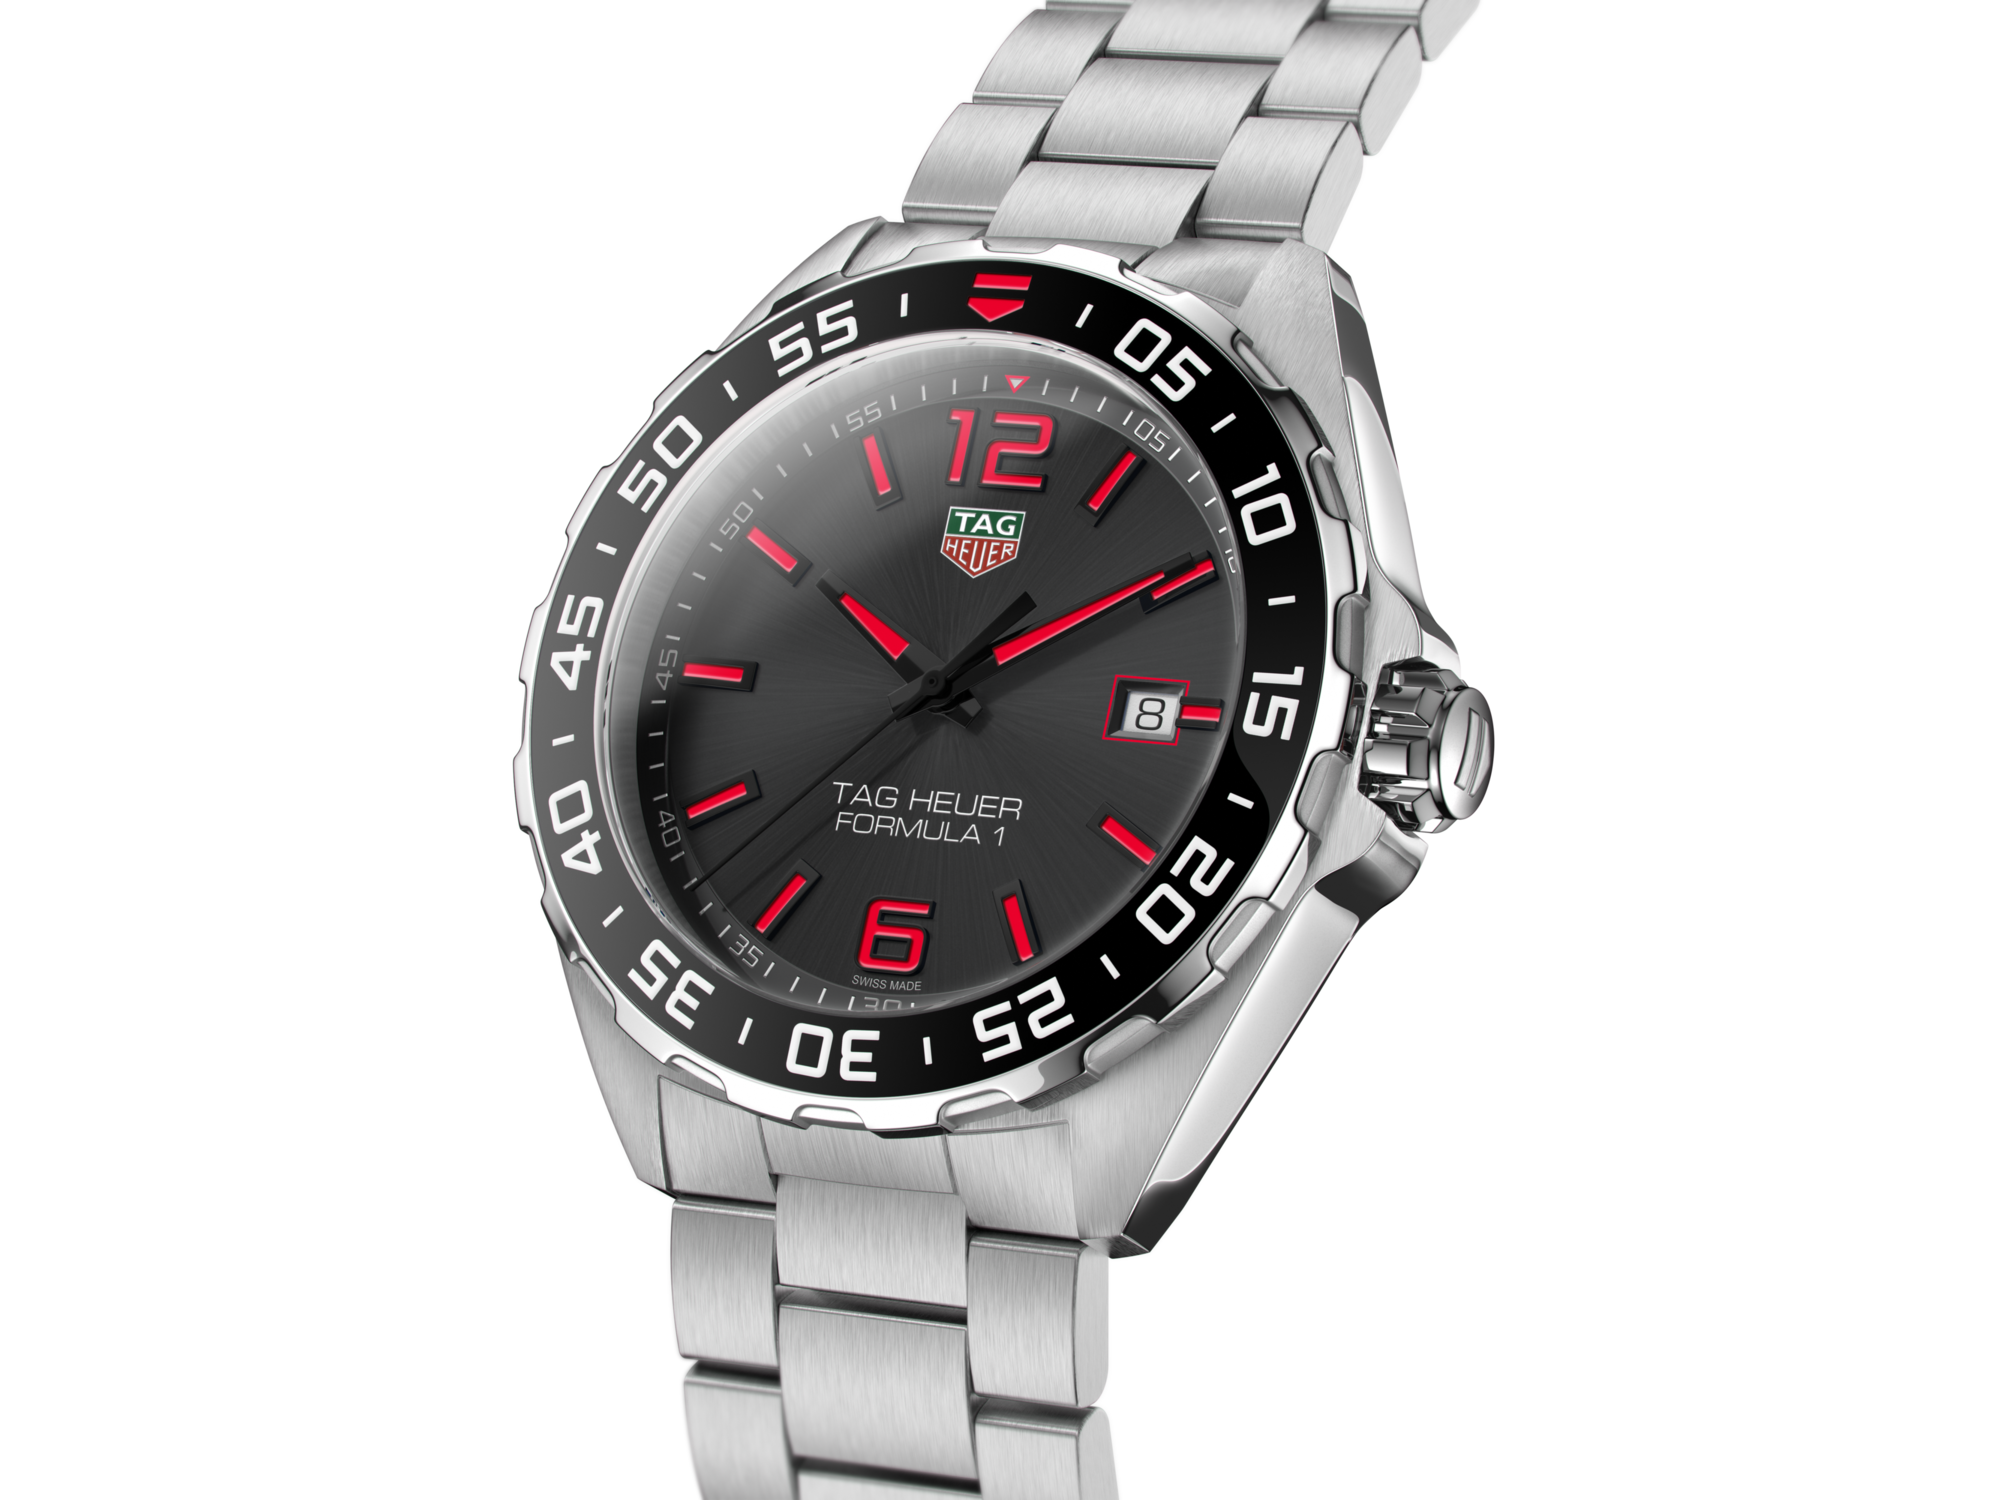 TAG Heuer -------- for $4,344 for sale from a Private Seller on